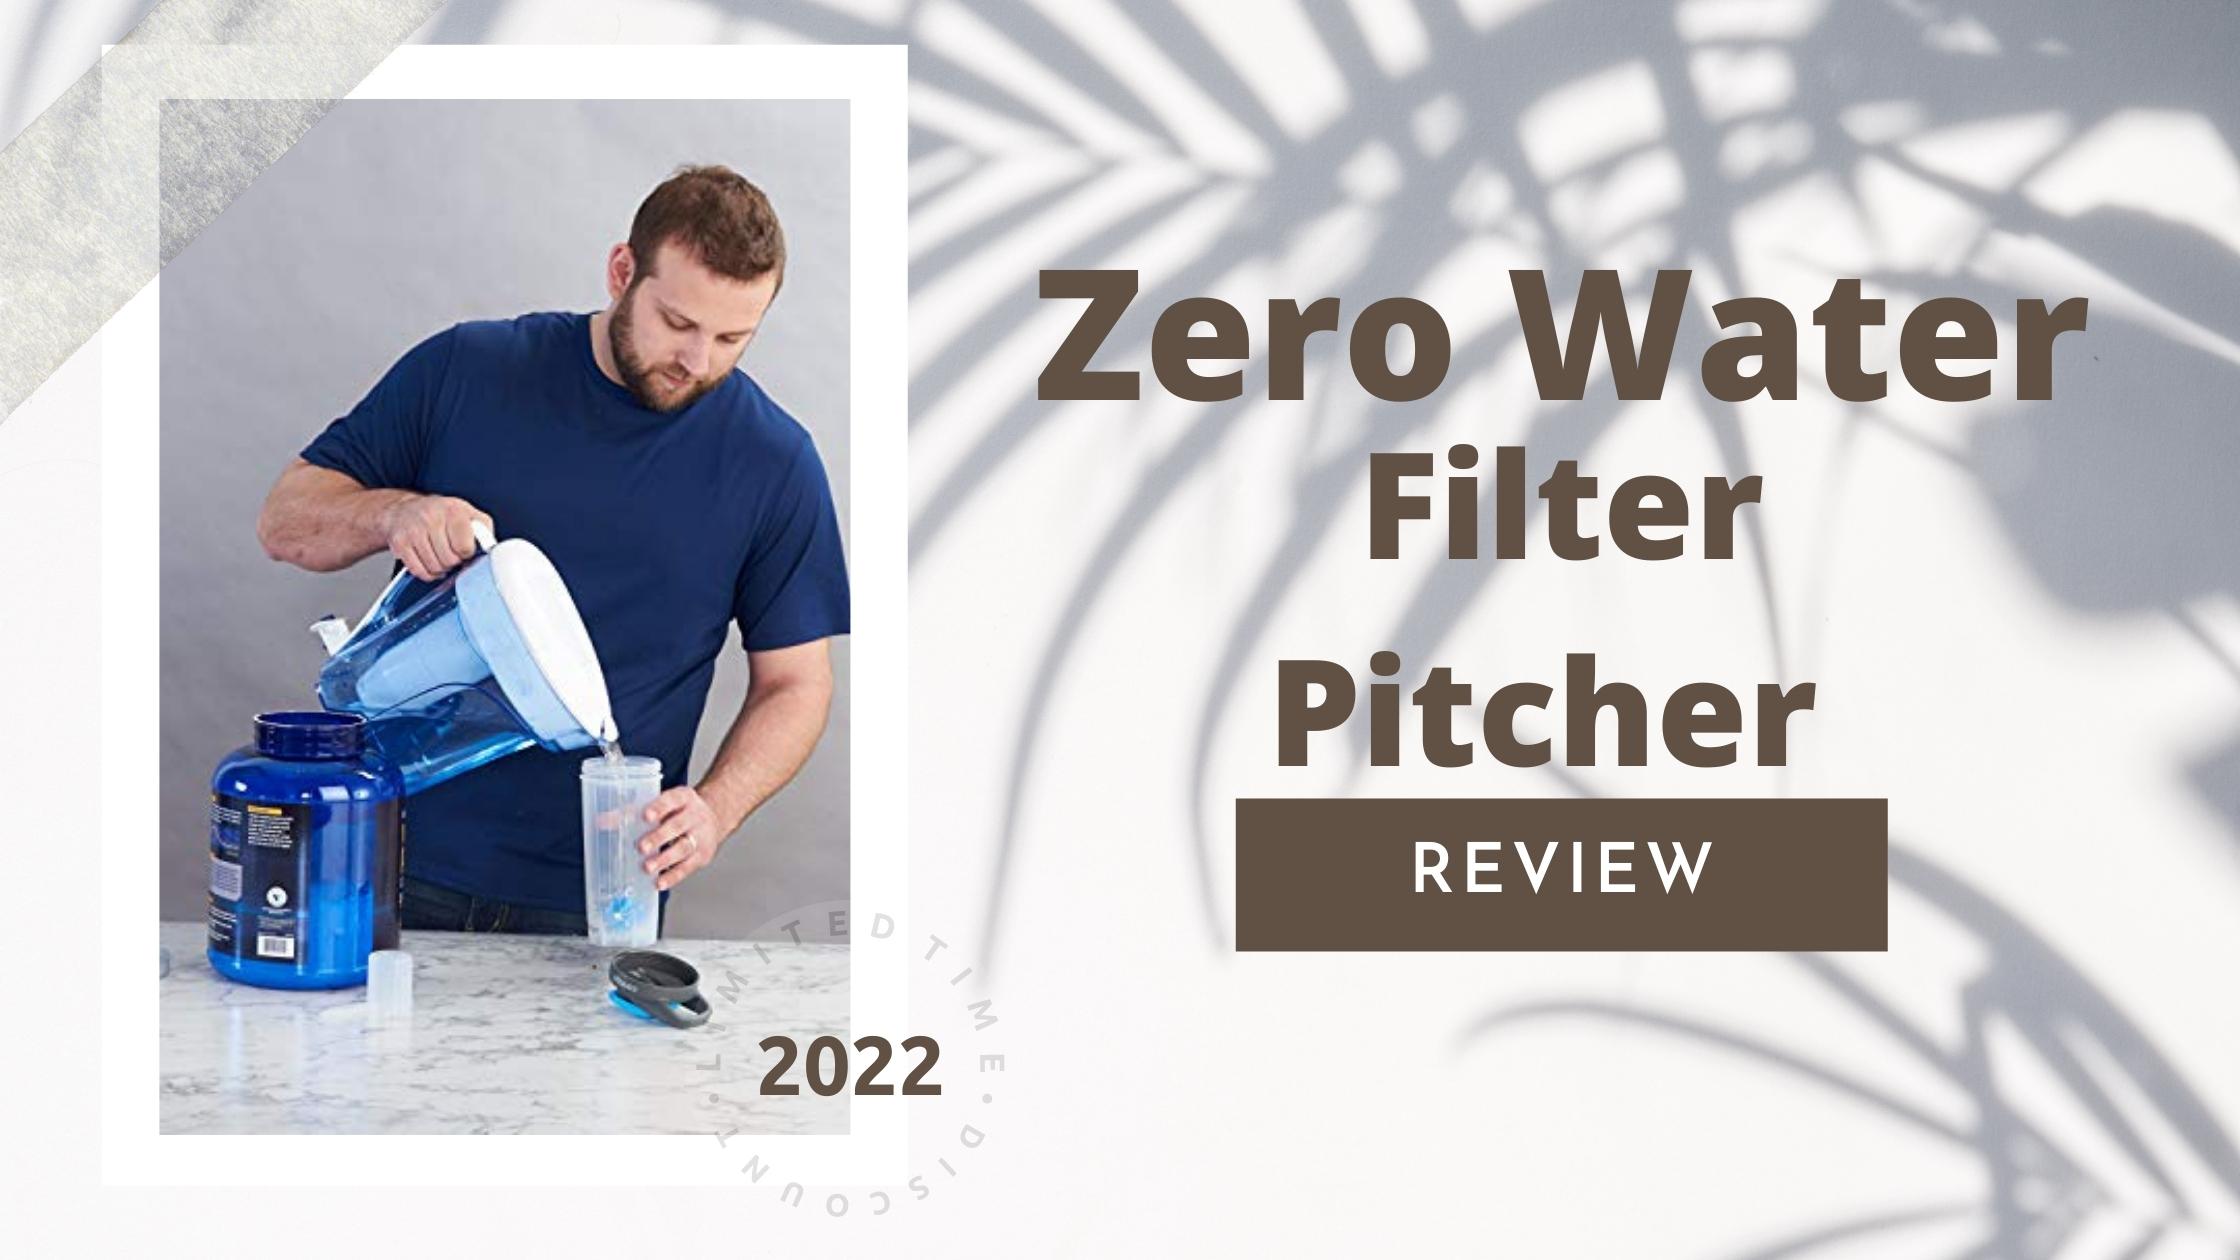 Zero Water Filter Pitcher Review